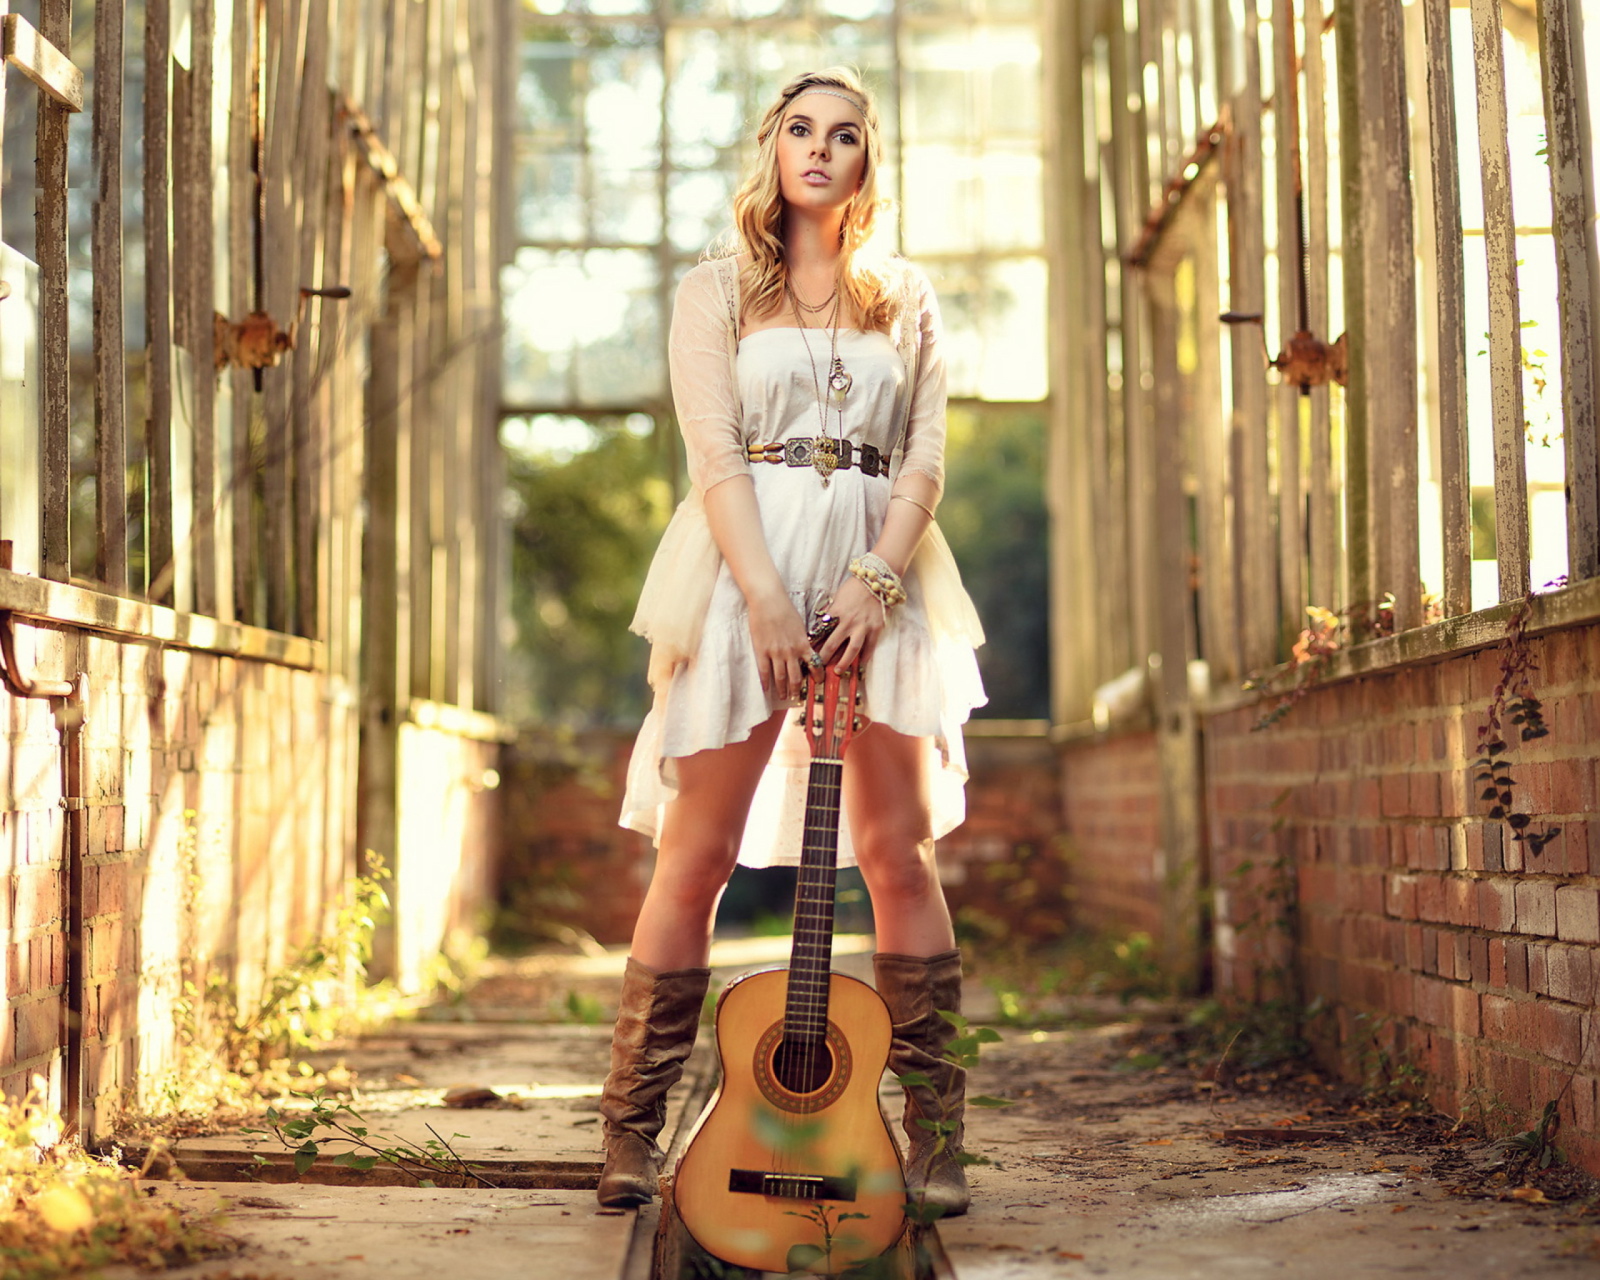 Das Girl With Guitar Chic Country Style Wallpaper 1600x1280